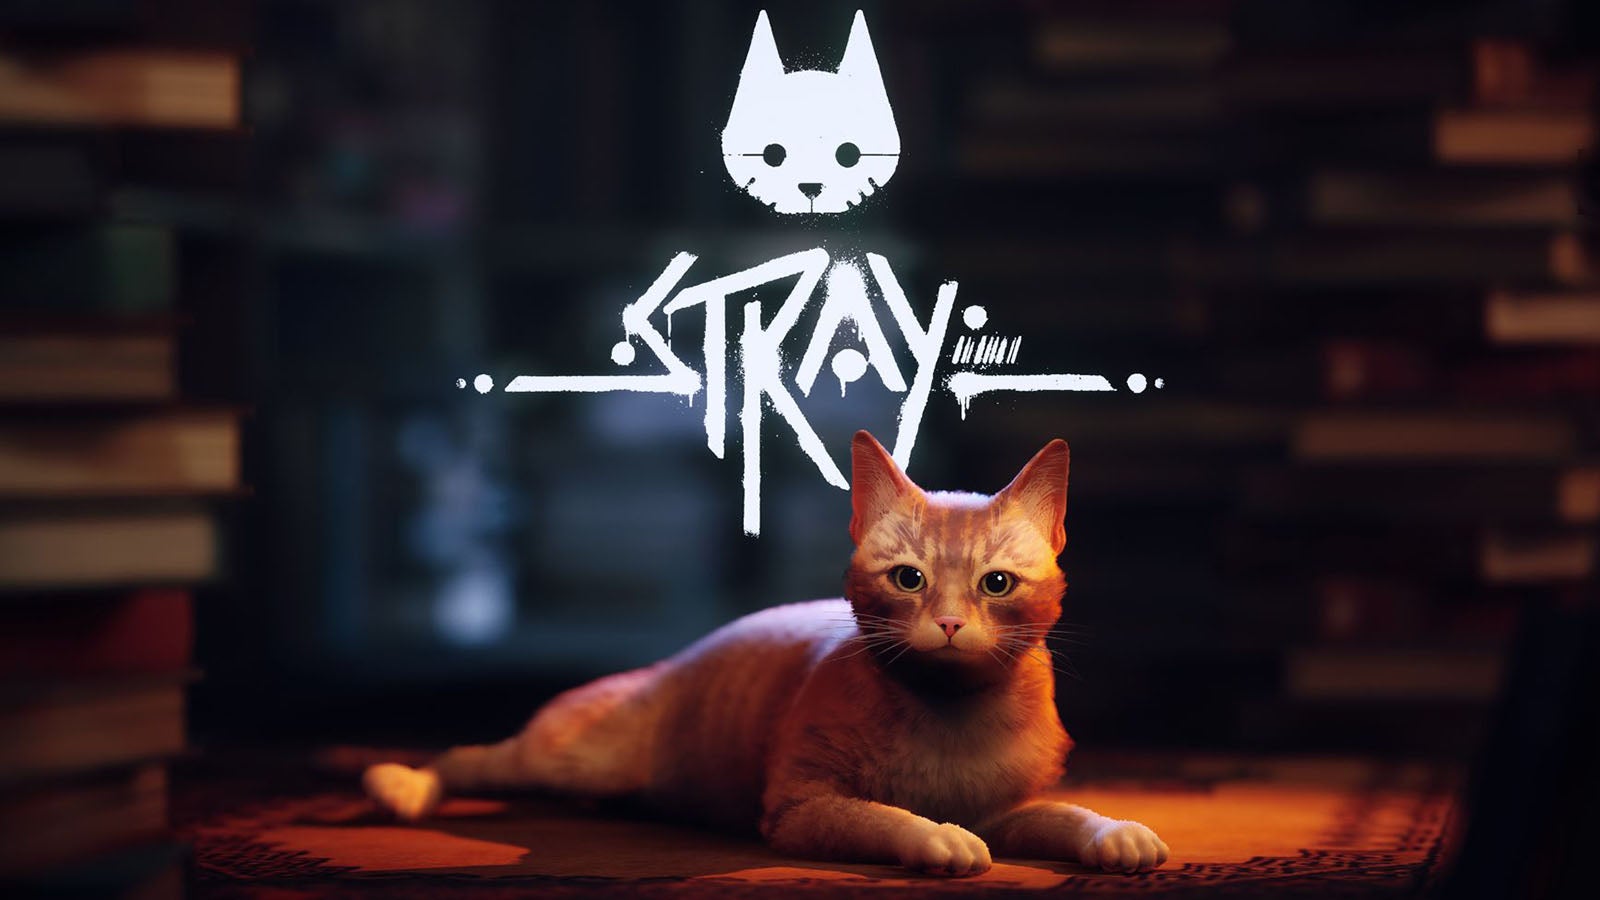 Image for Stray promises a fascinating journey through the eyes of a cat